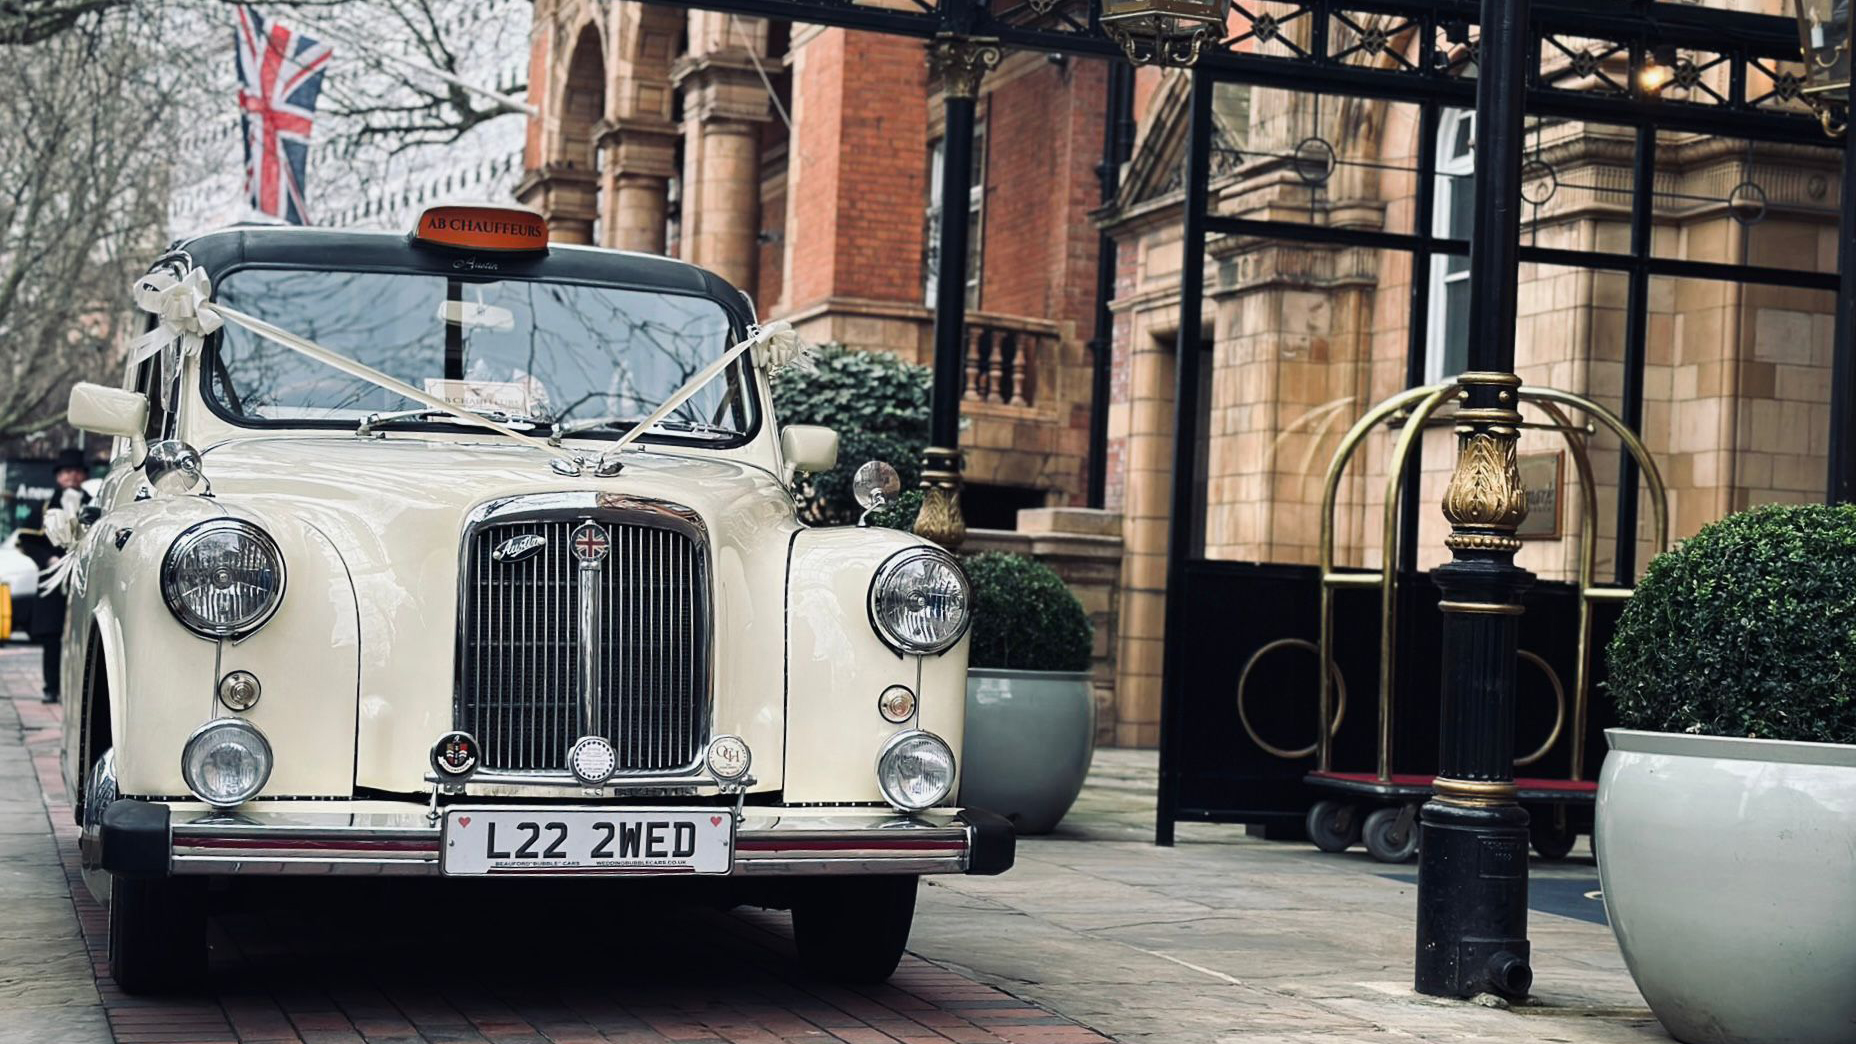 Classic Taxi Cab decorated with traditional wedding ribbons in white in front of wedding venue in London